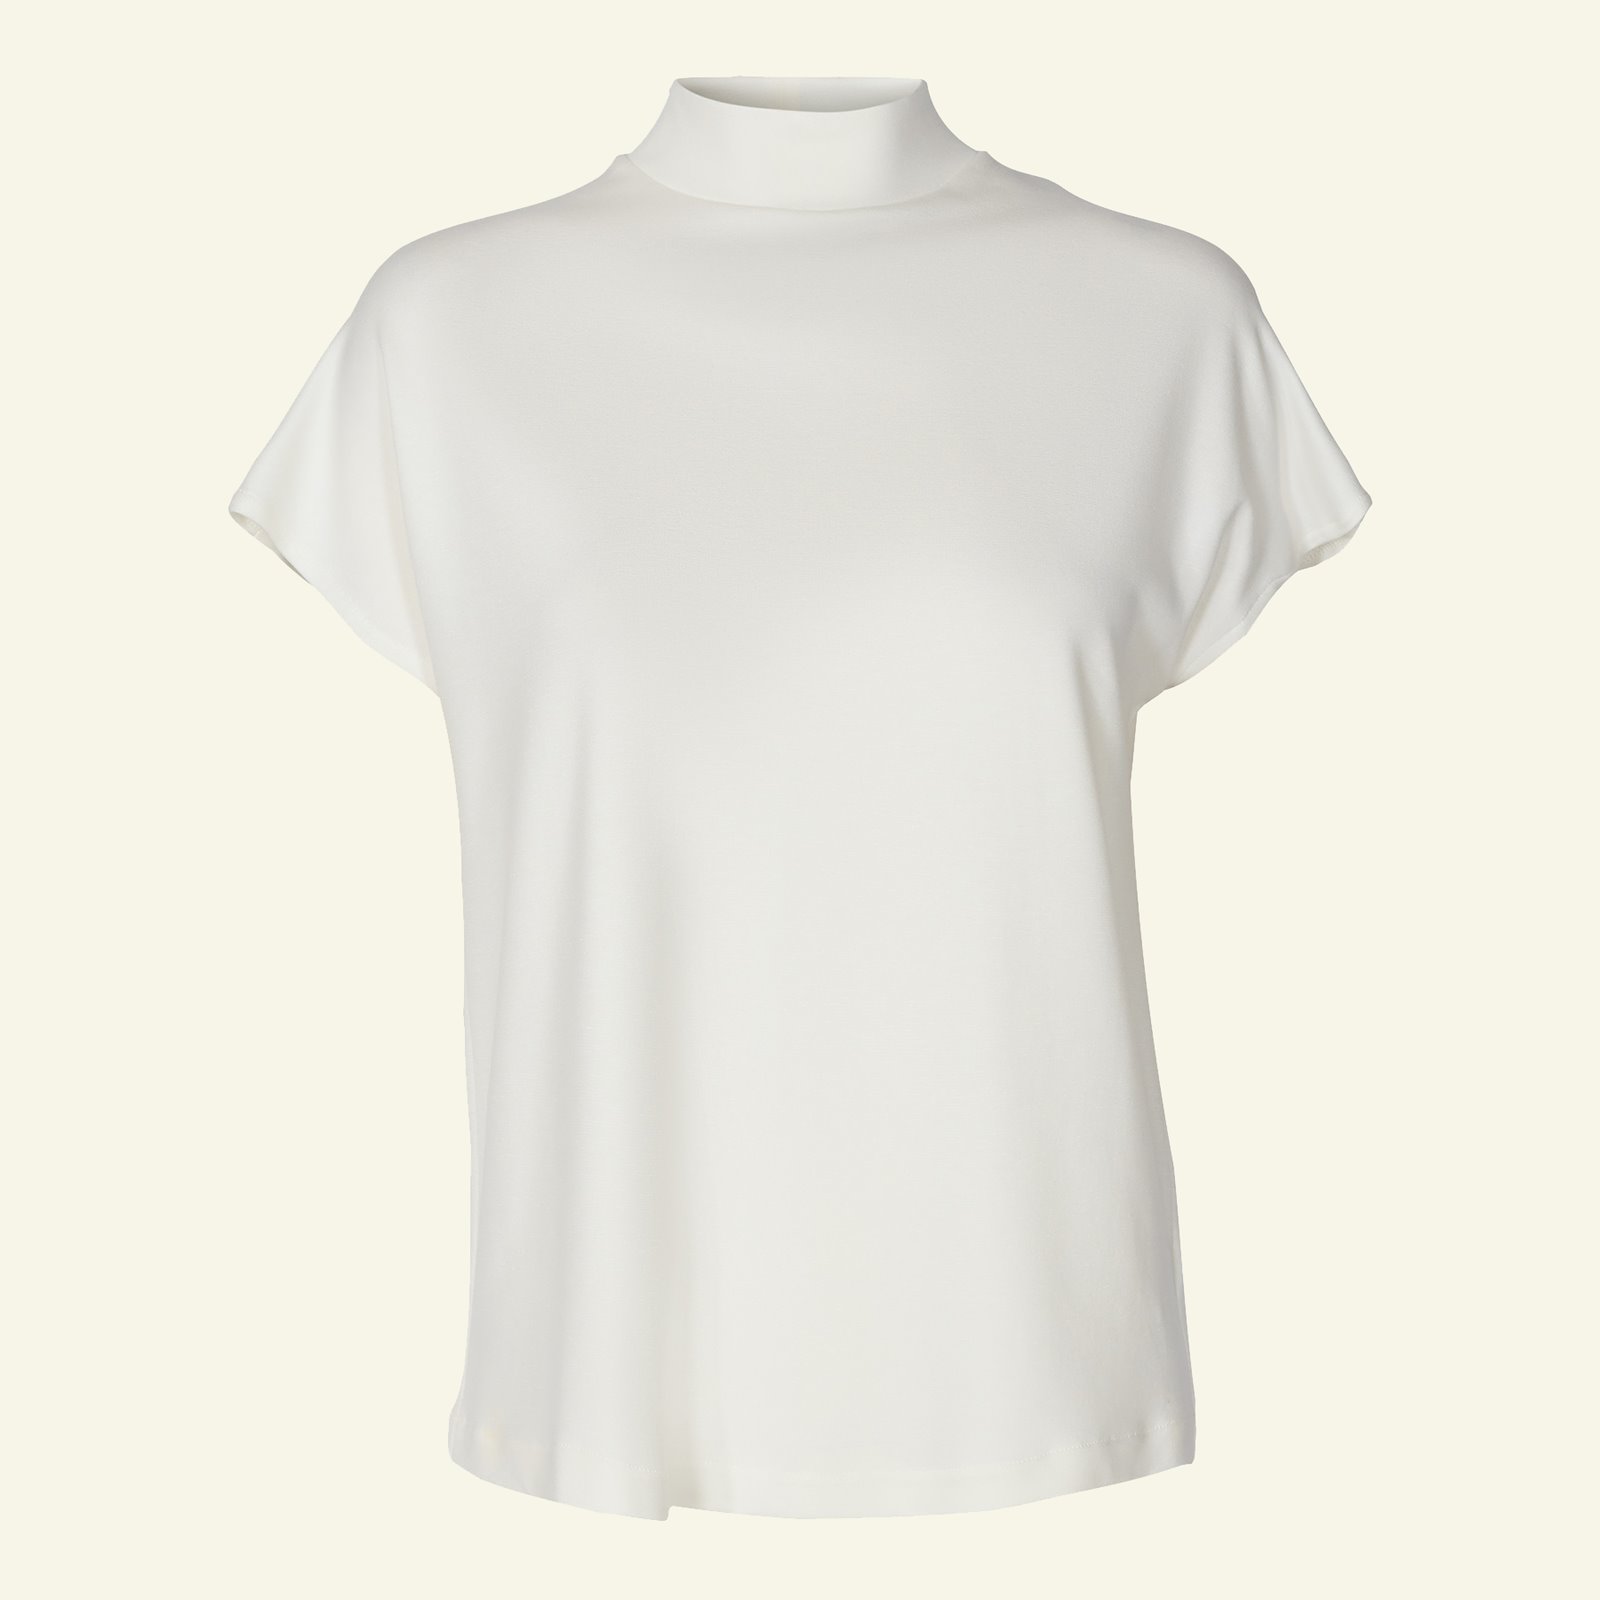 T-shirt and dress with high-neck, 36/8 p22069_270412_sskit